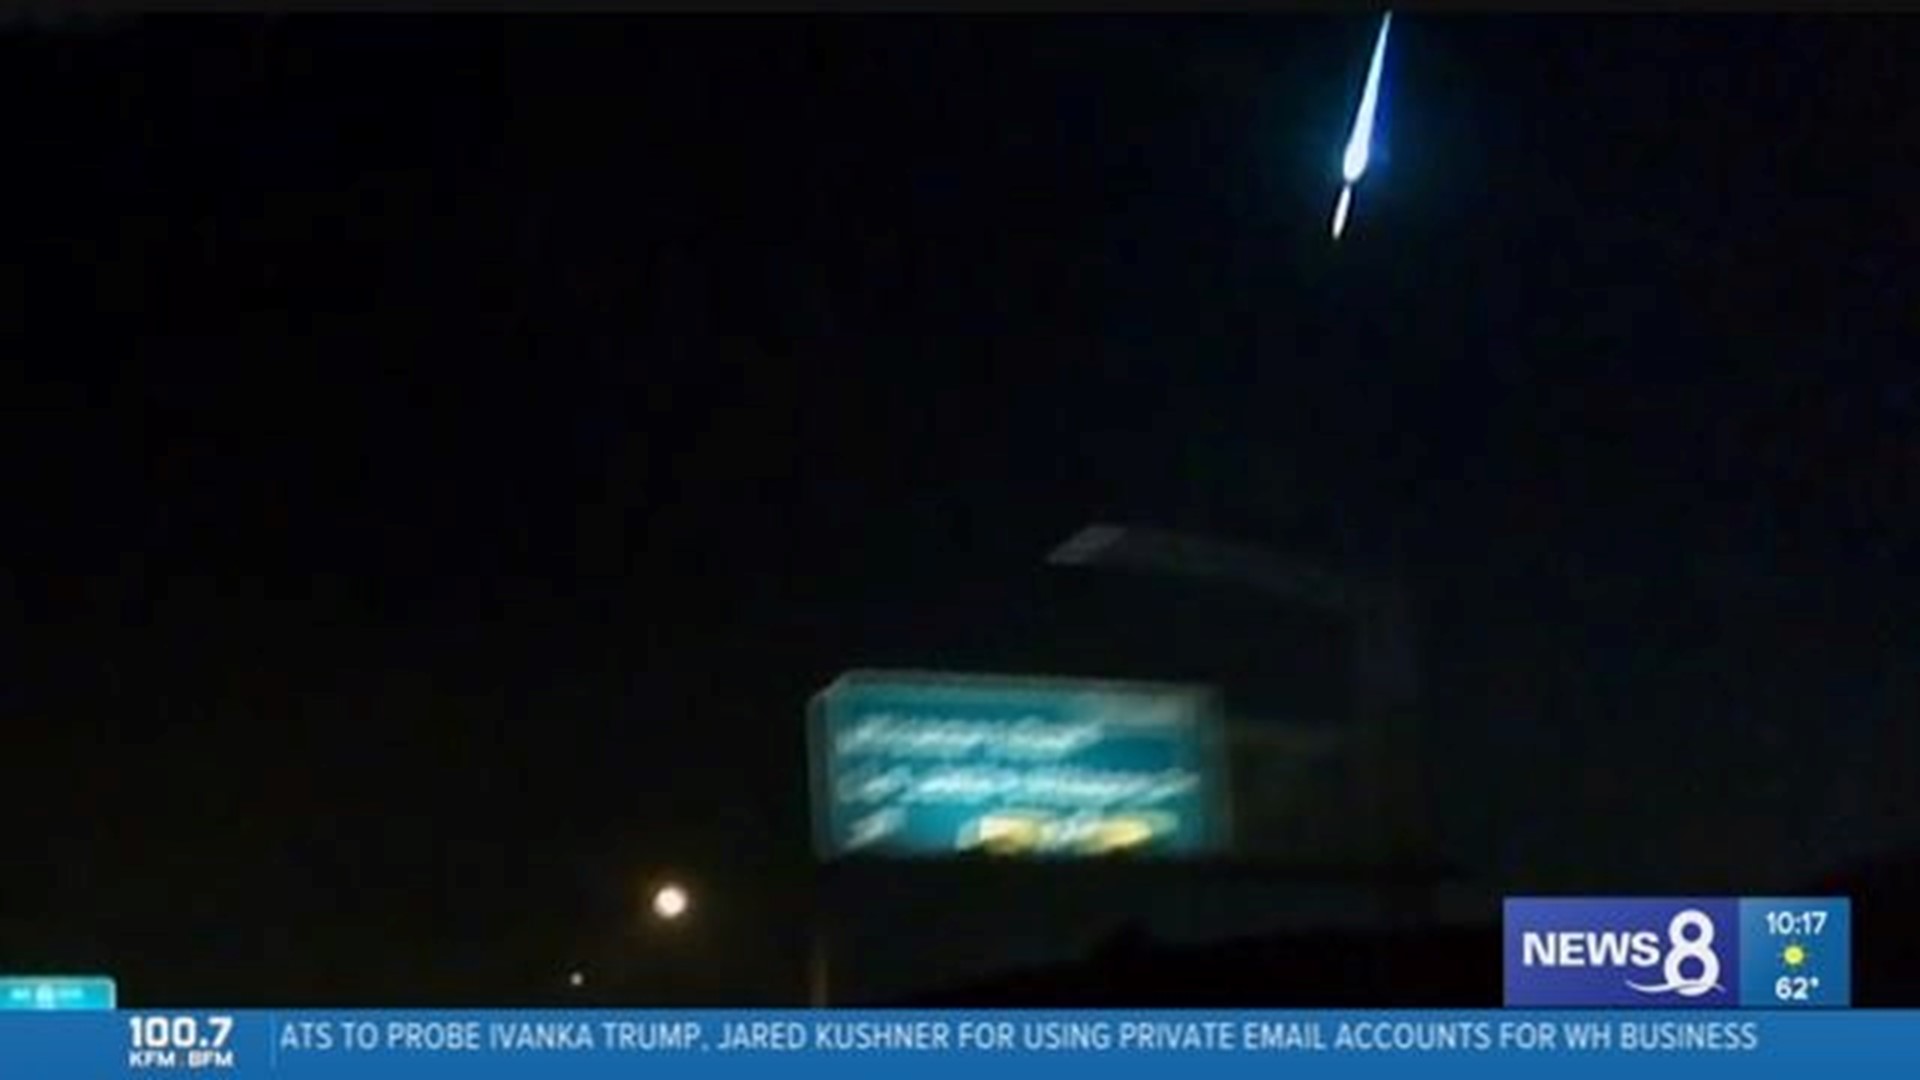 News 8 photojournalist captures meteor over Southern California sky